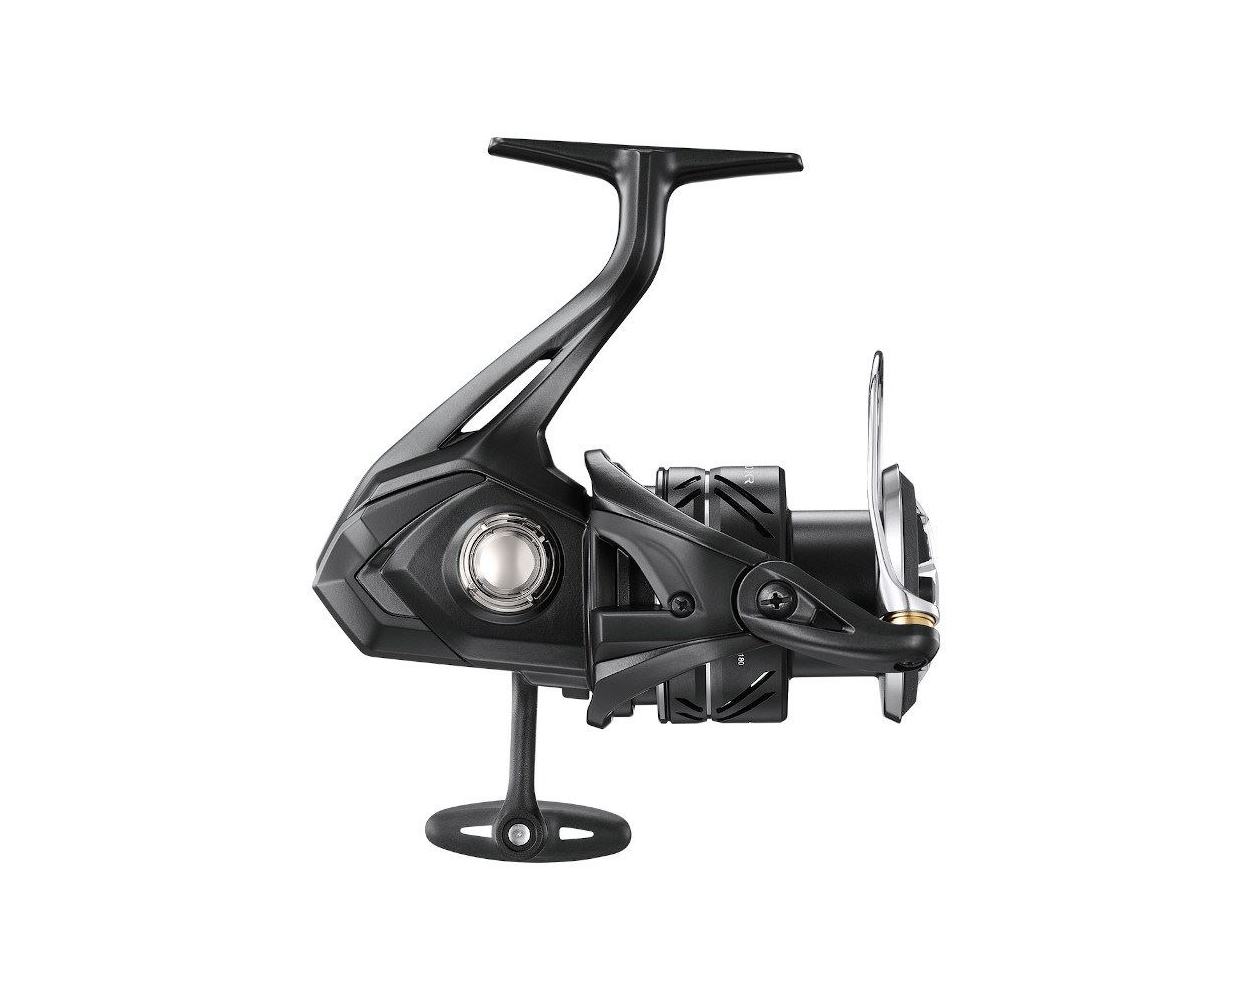 https://www.bristolangling.com/media/catalog/product/cache/3baf0cabed62547553189dd5548092a5/s/h/shimano_xr_reels_2.png